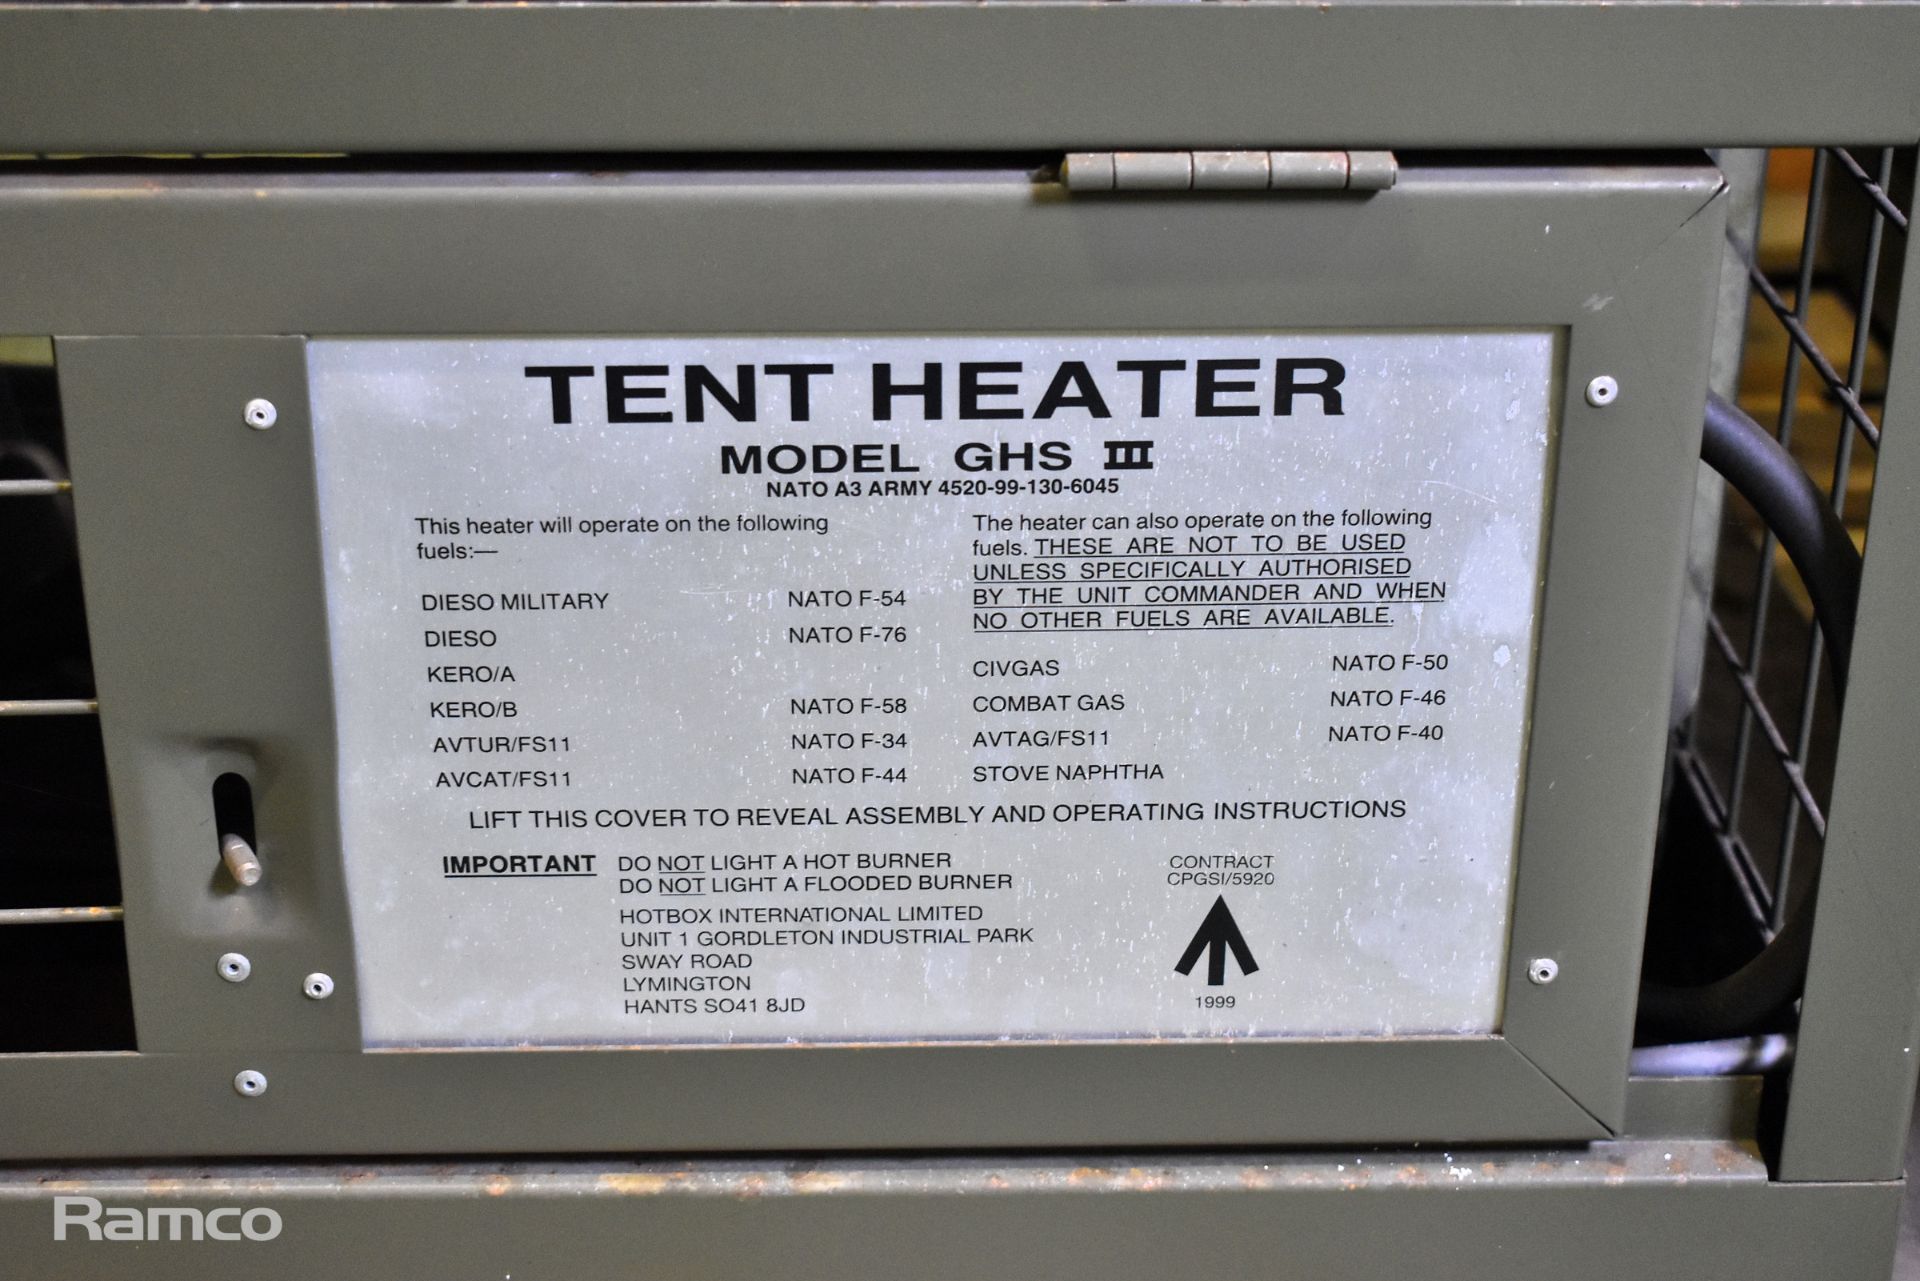 Tent Heater Model GHS 3 - NATO A3 Army NSN 4520-99-130-6045 - Image 3 of 3